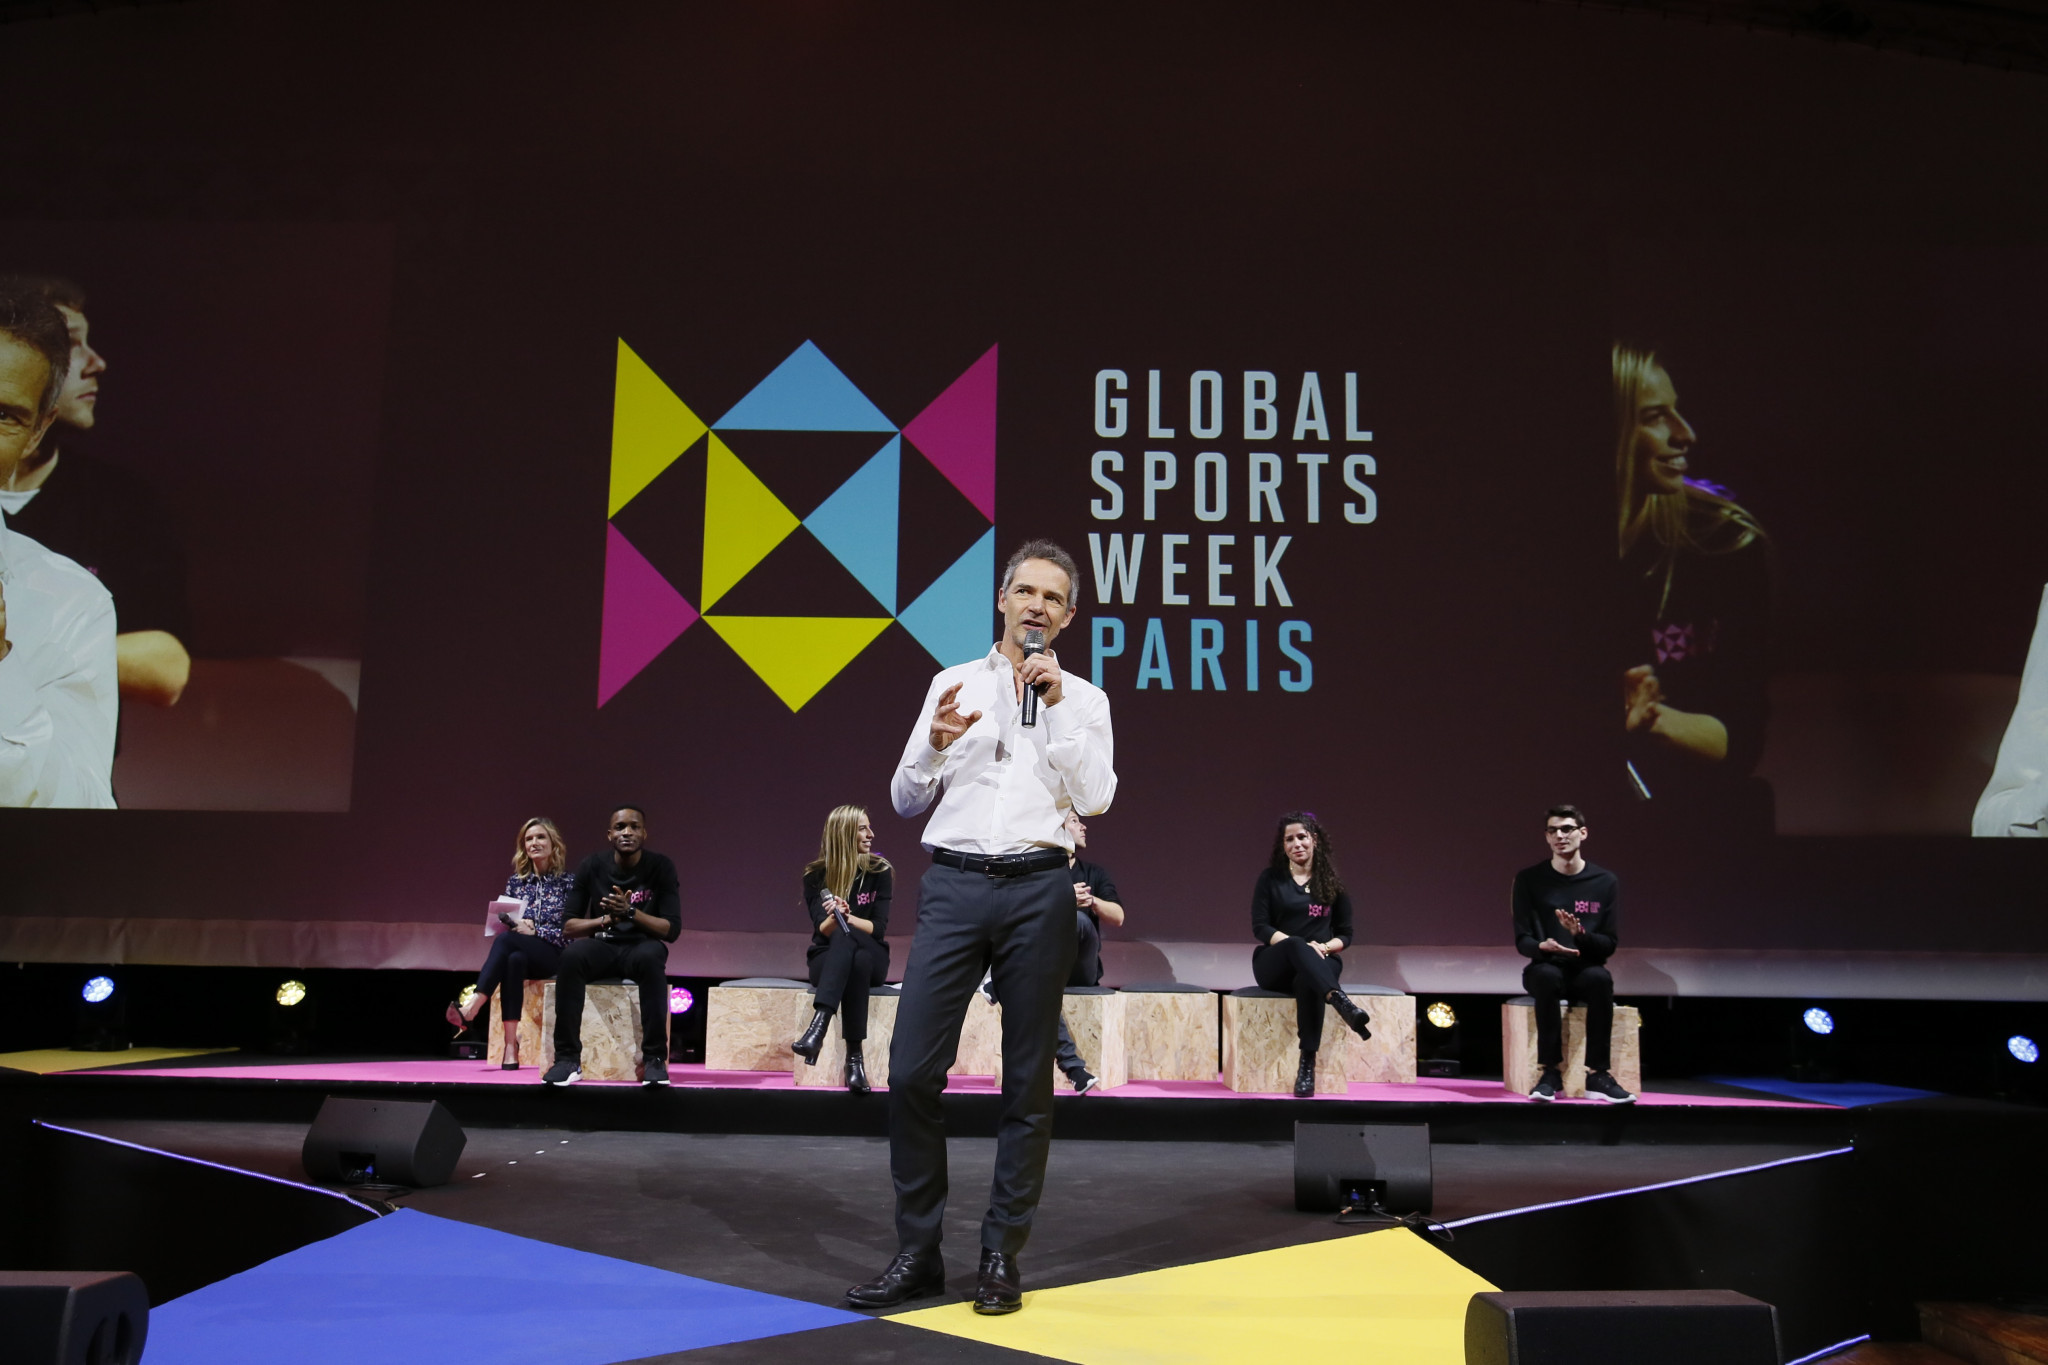 Global Sports Week to give sporting leaders chance to share ideas in time of "tension"